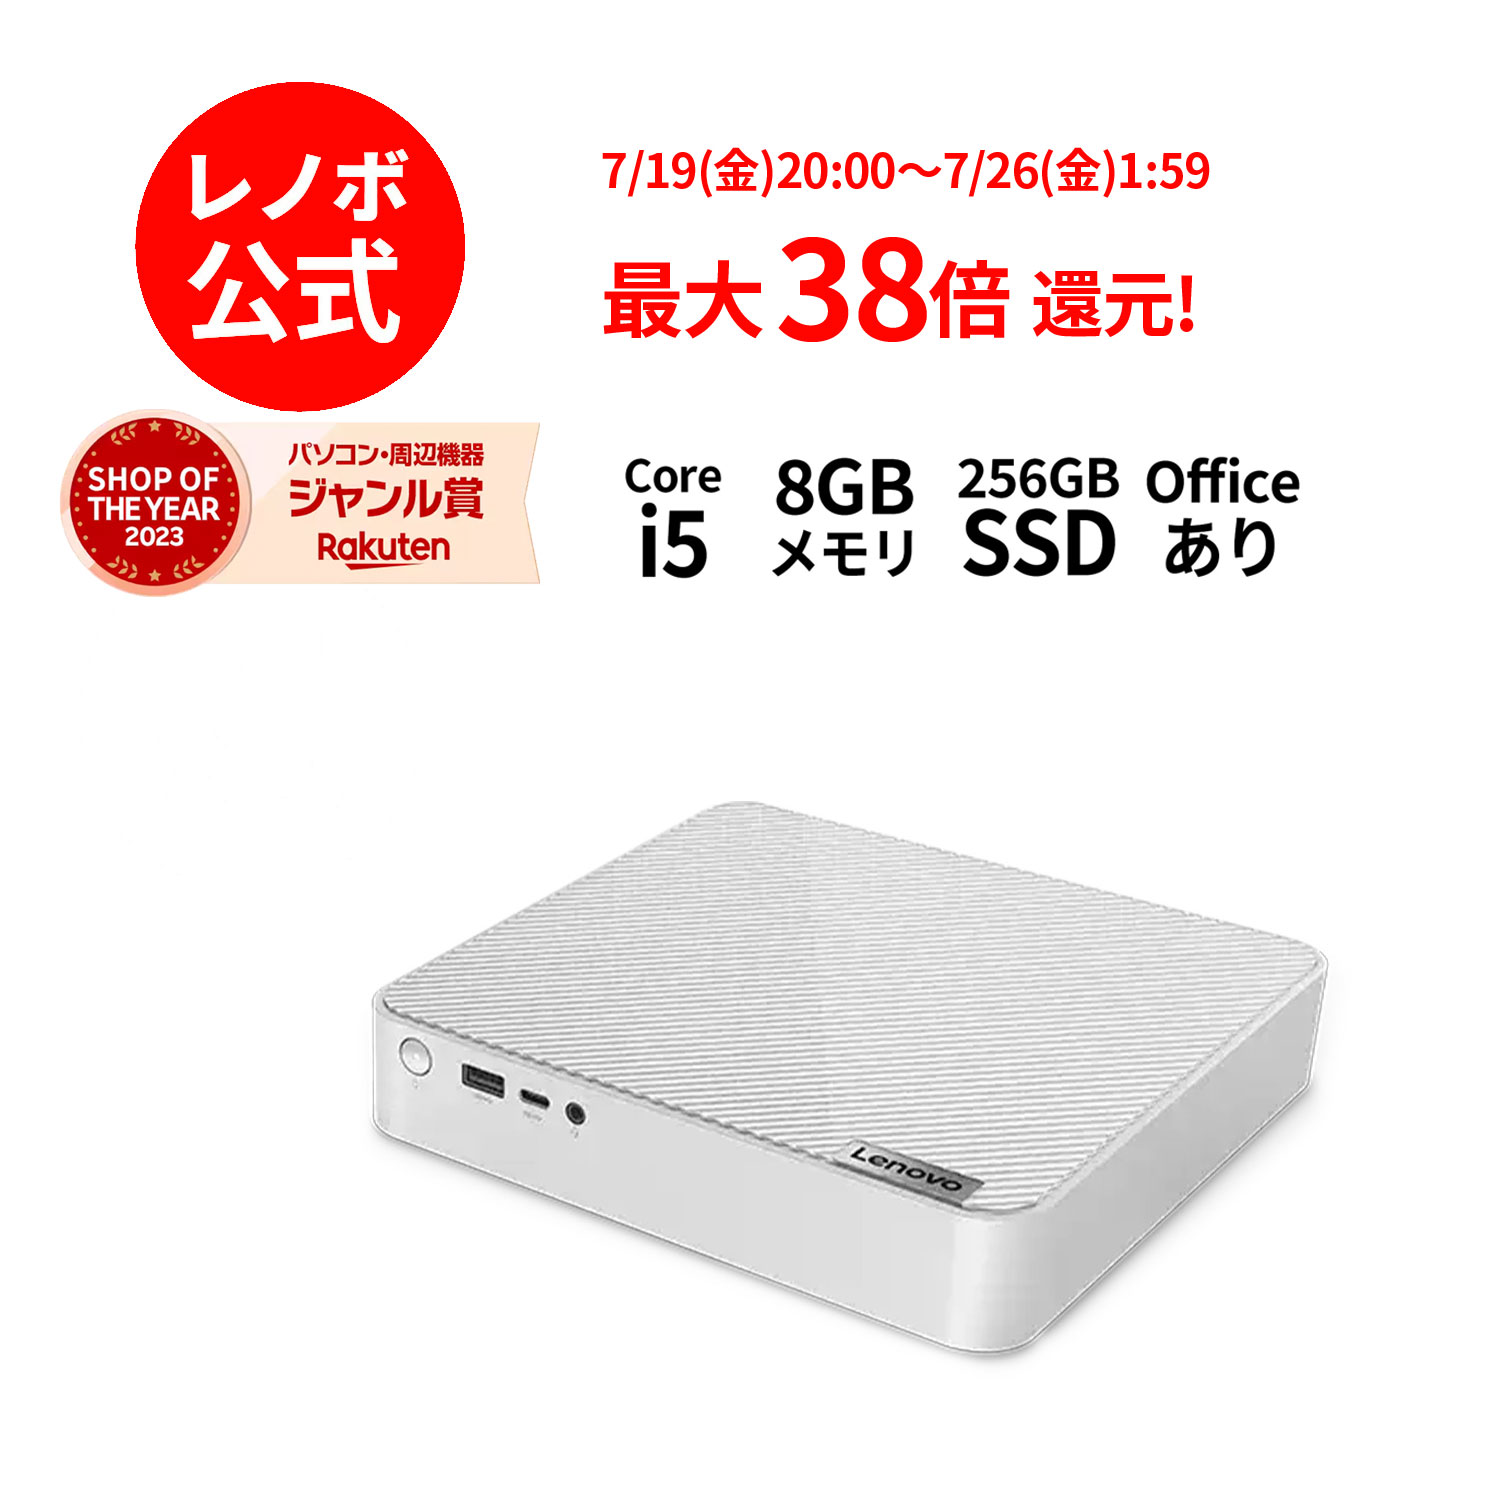 【6/4-6/13】P10倍 【短納期】新生活 直販 デスクトップパソコン Officeあり：IdeaCentre Mini Gen 8 Core i5-13500H搭載 8GBメモリー 256GB SSD Microsoft Office Home & Business 2021 Windo…